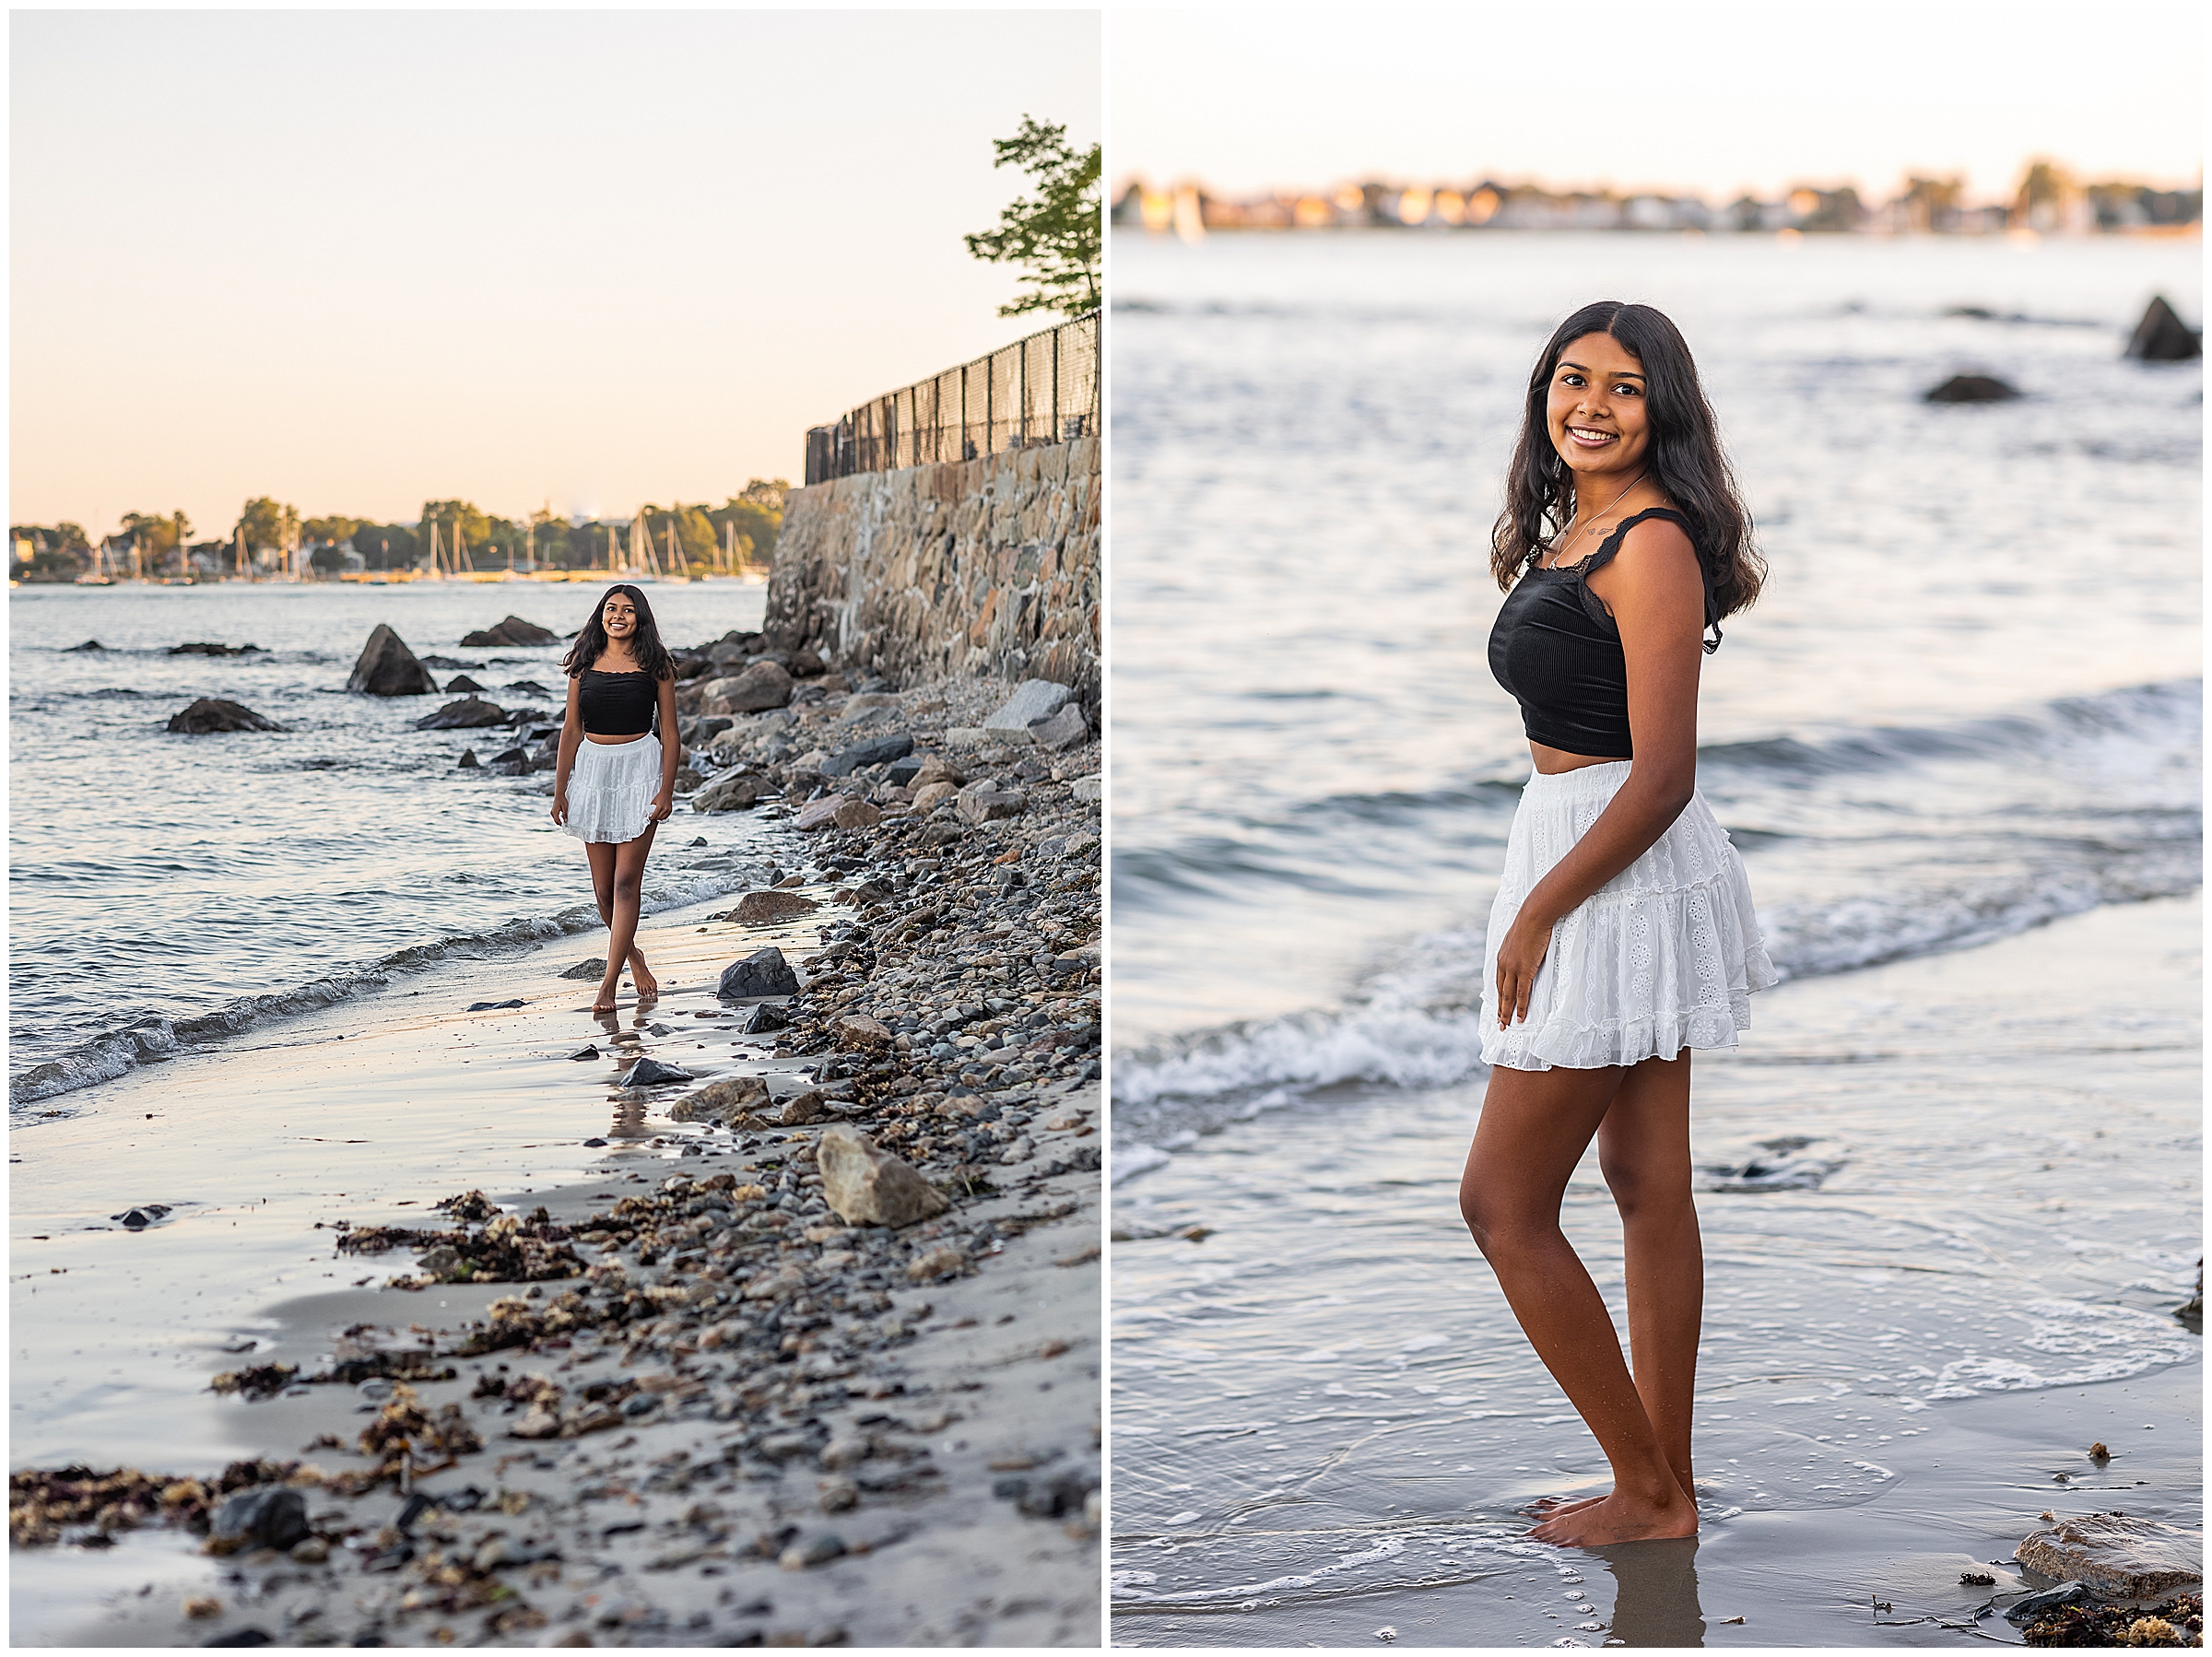 A girl in a black top and white skirt walks on the beach